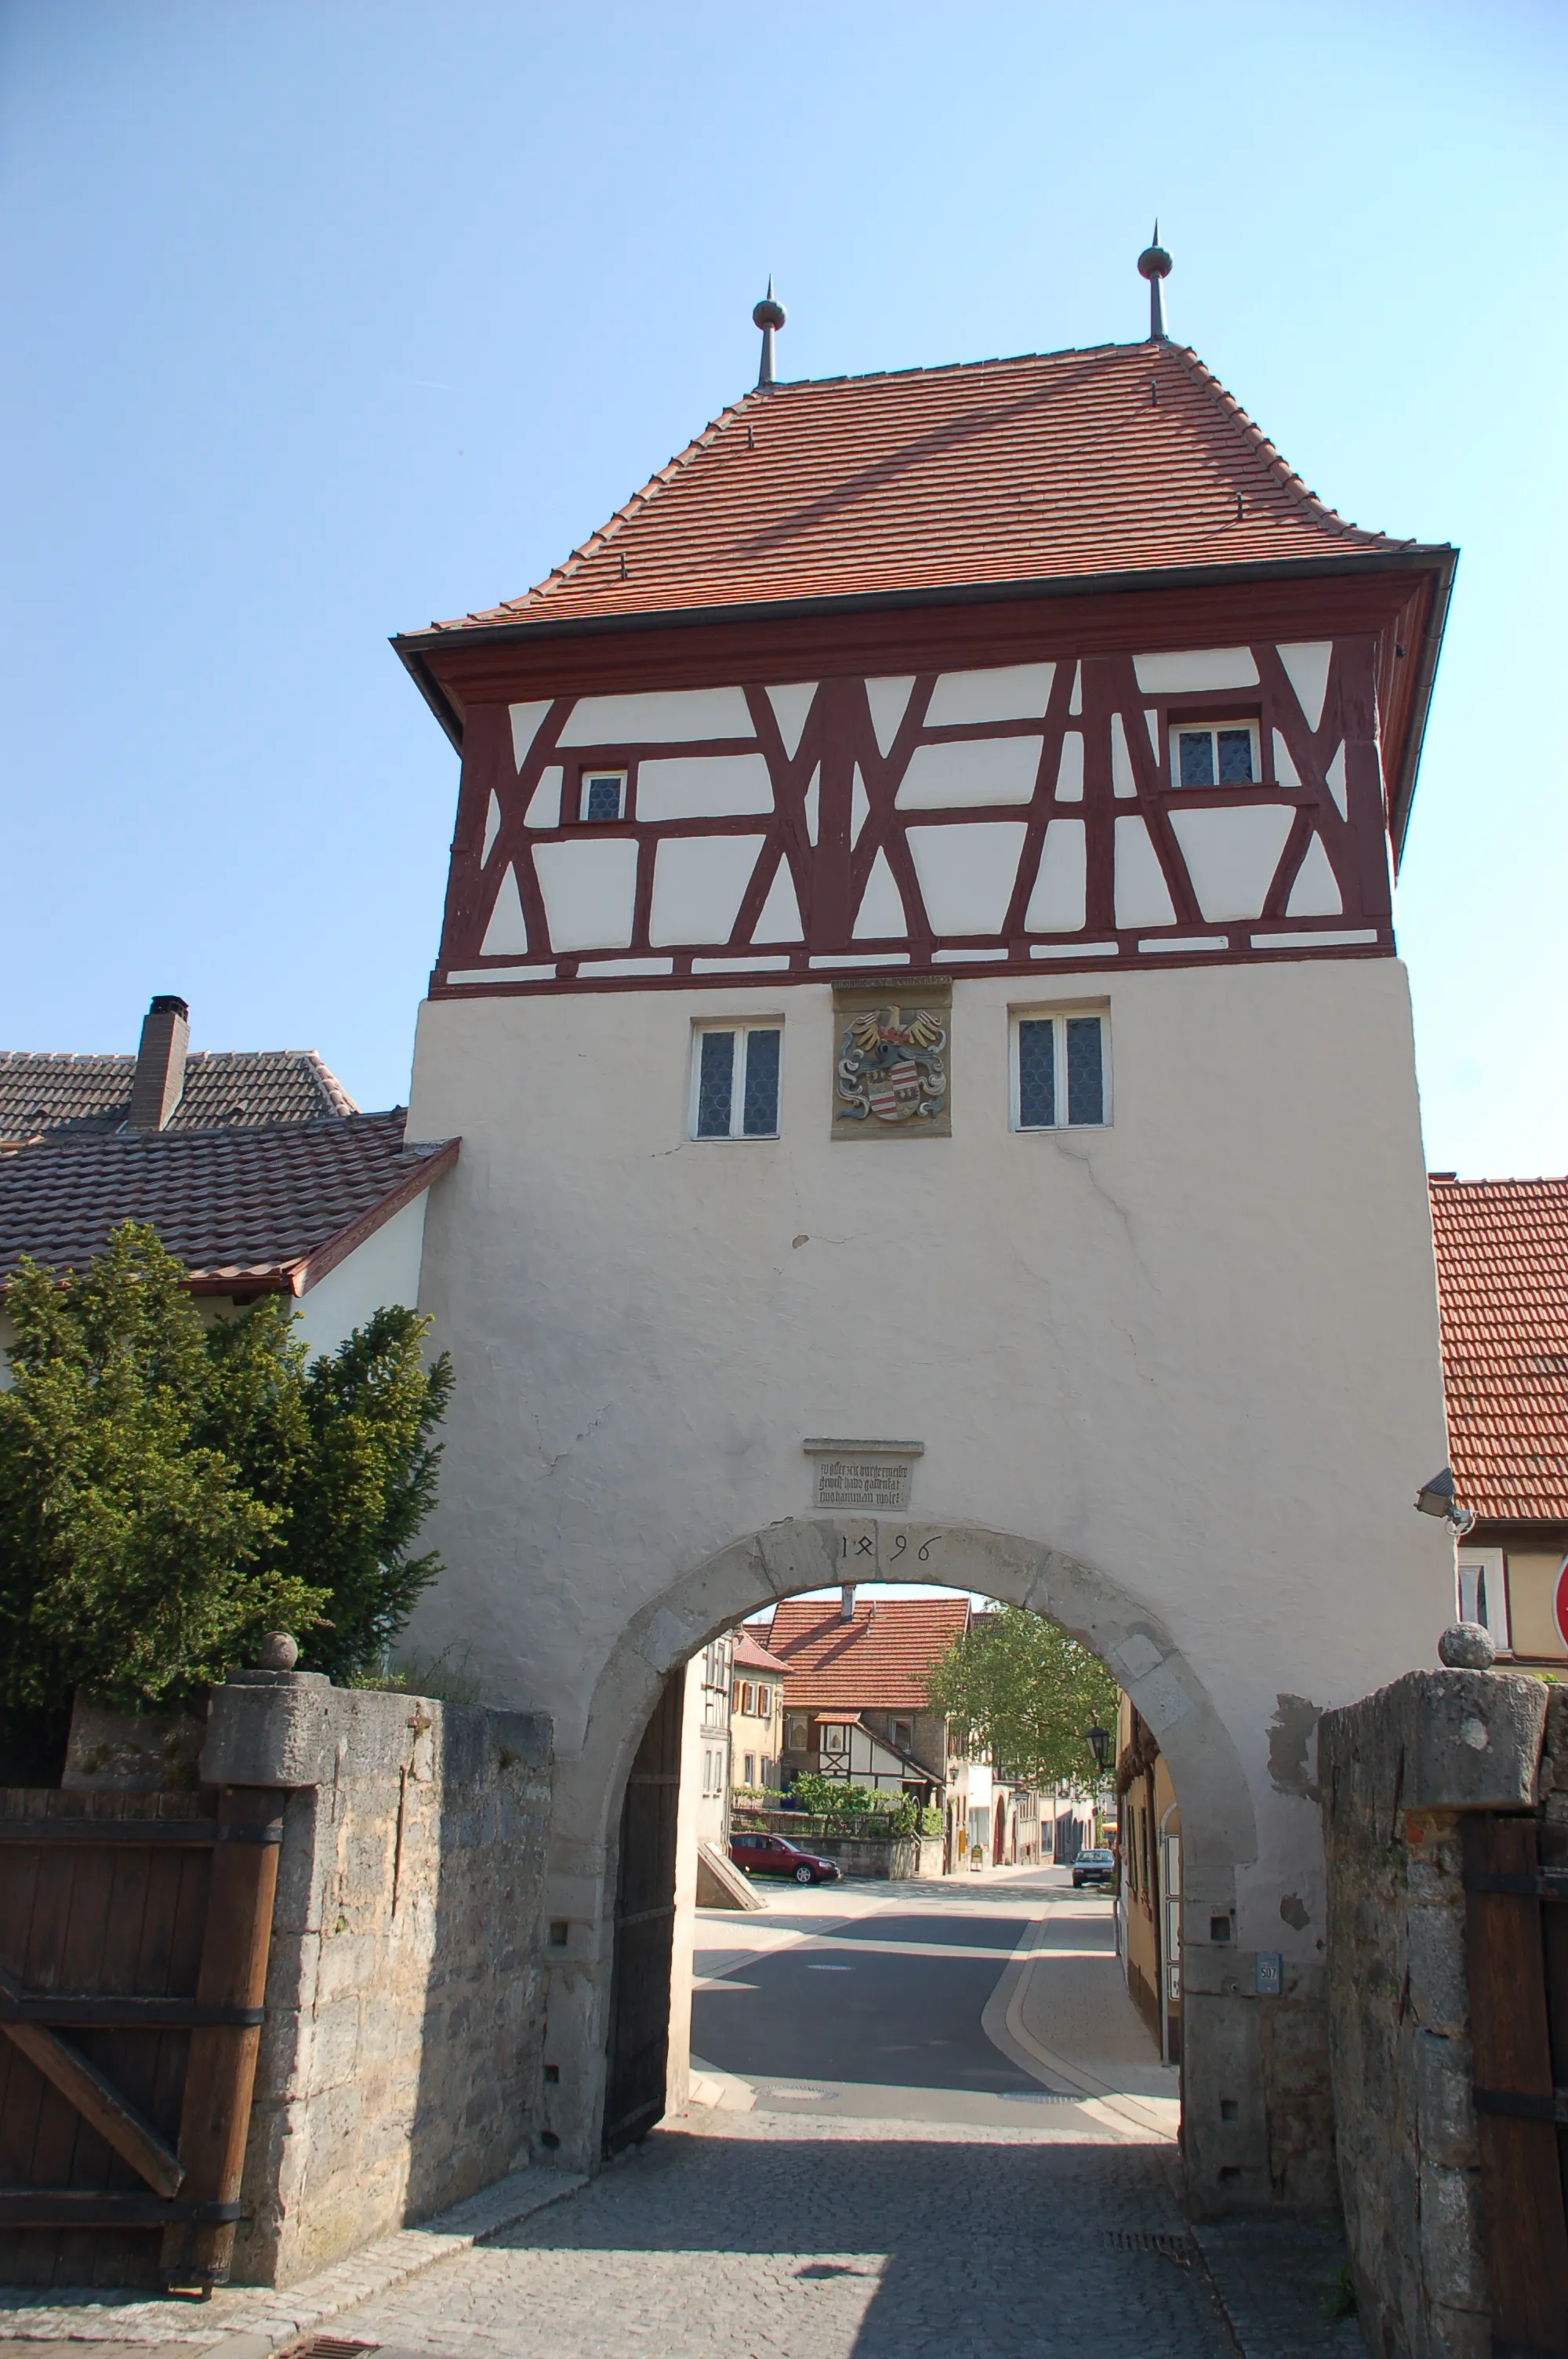 Photo showing: The city gates in Lauda